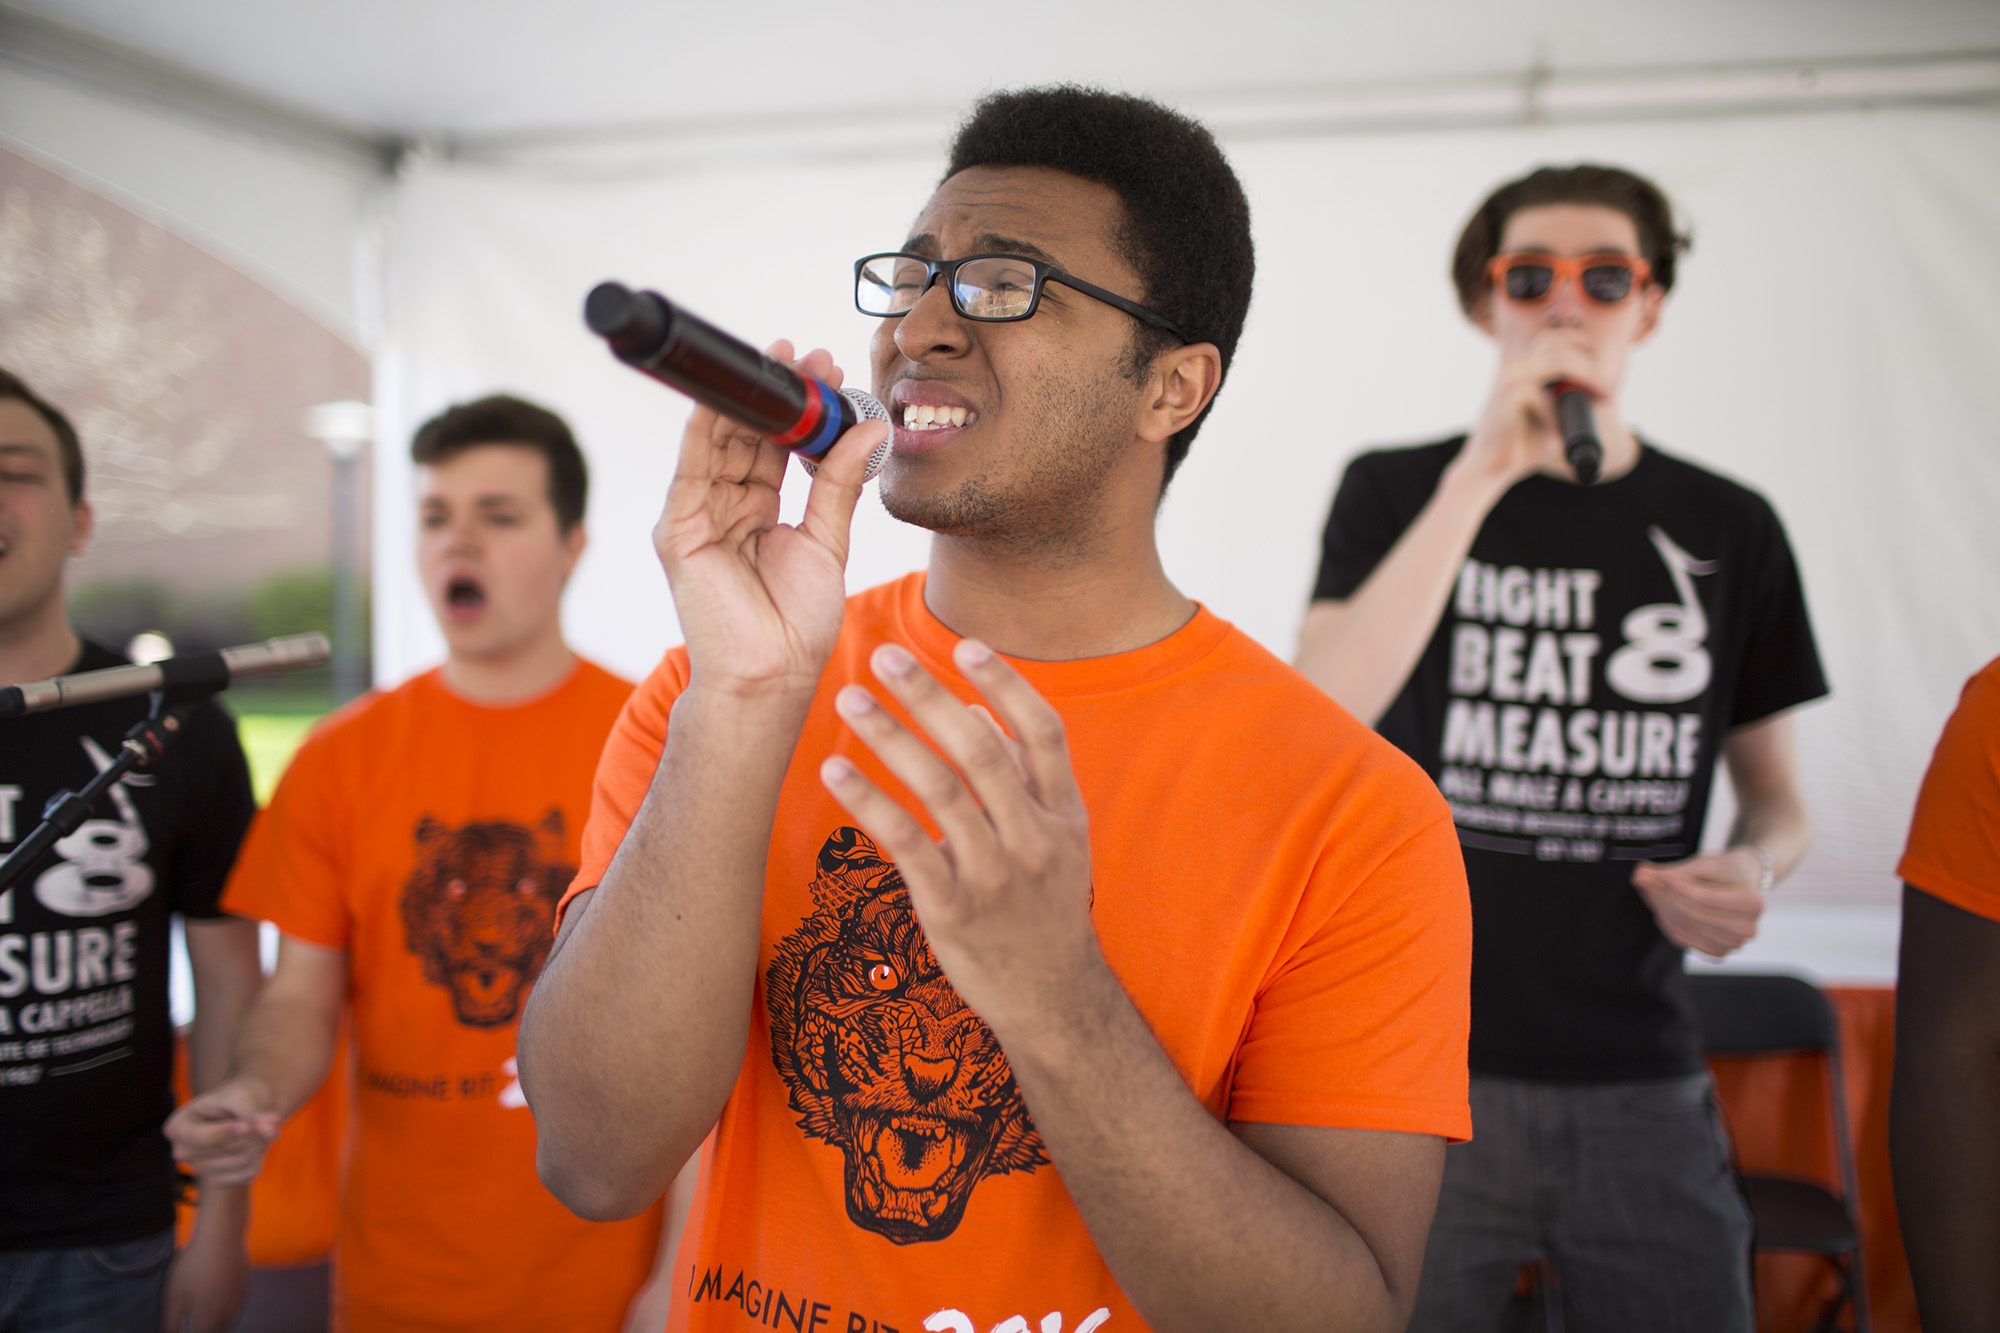 Deshawn Cervi (cq) sings during a performance by 8 Beat Measure during Imagine RIT: Innovation and Creativity Festival on the Rochester Institute of Technology campus in Rochester, N.Y., May 7, 2016.  (Photo by Tom Brenner)  #imaginerit #ritpj